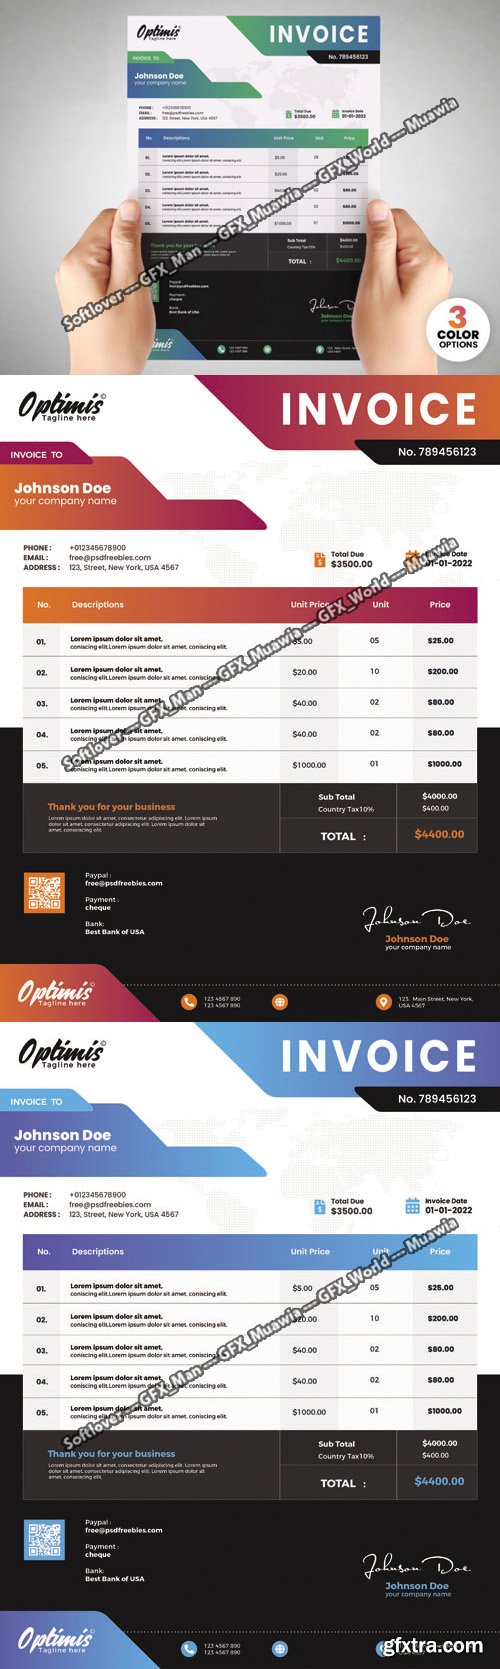 Modern A4 Invoice PSD Templates with 3 Colors